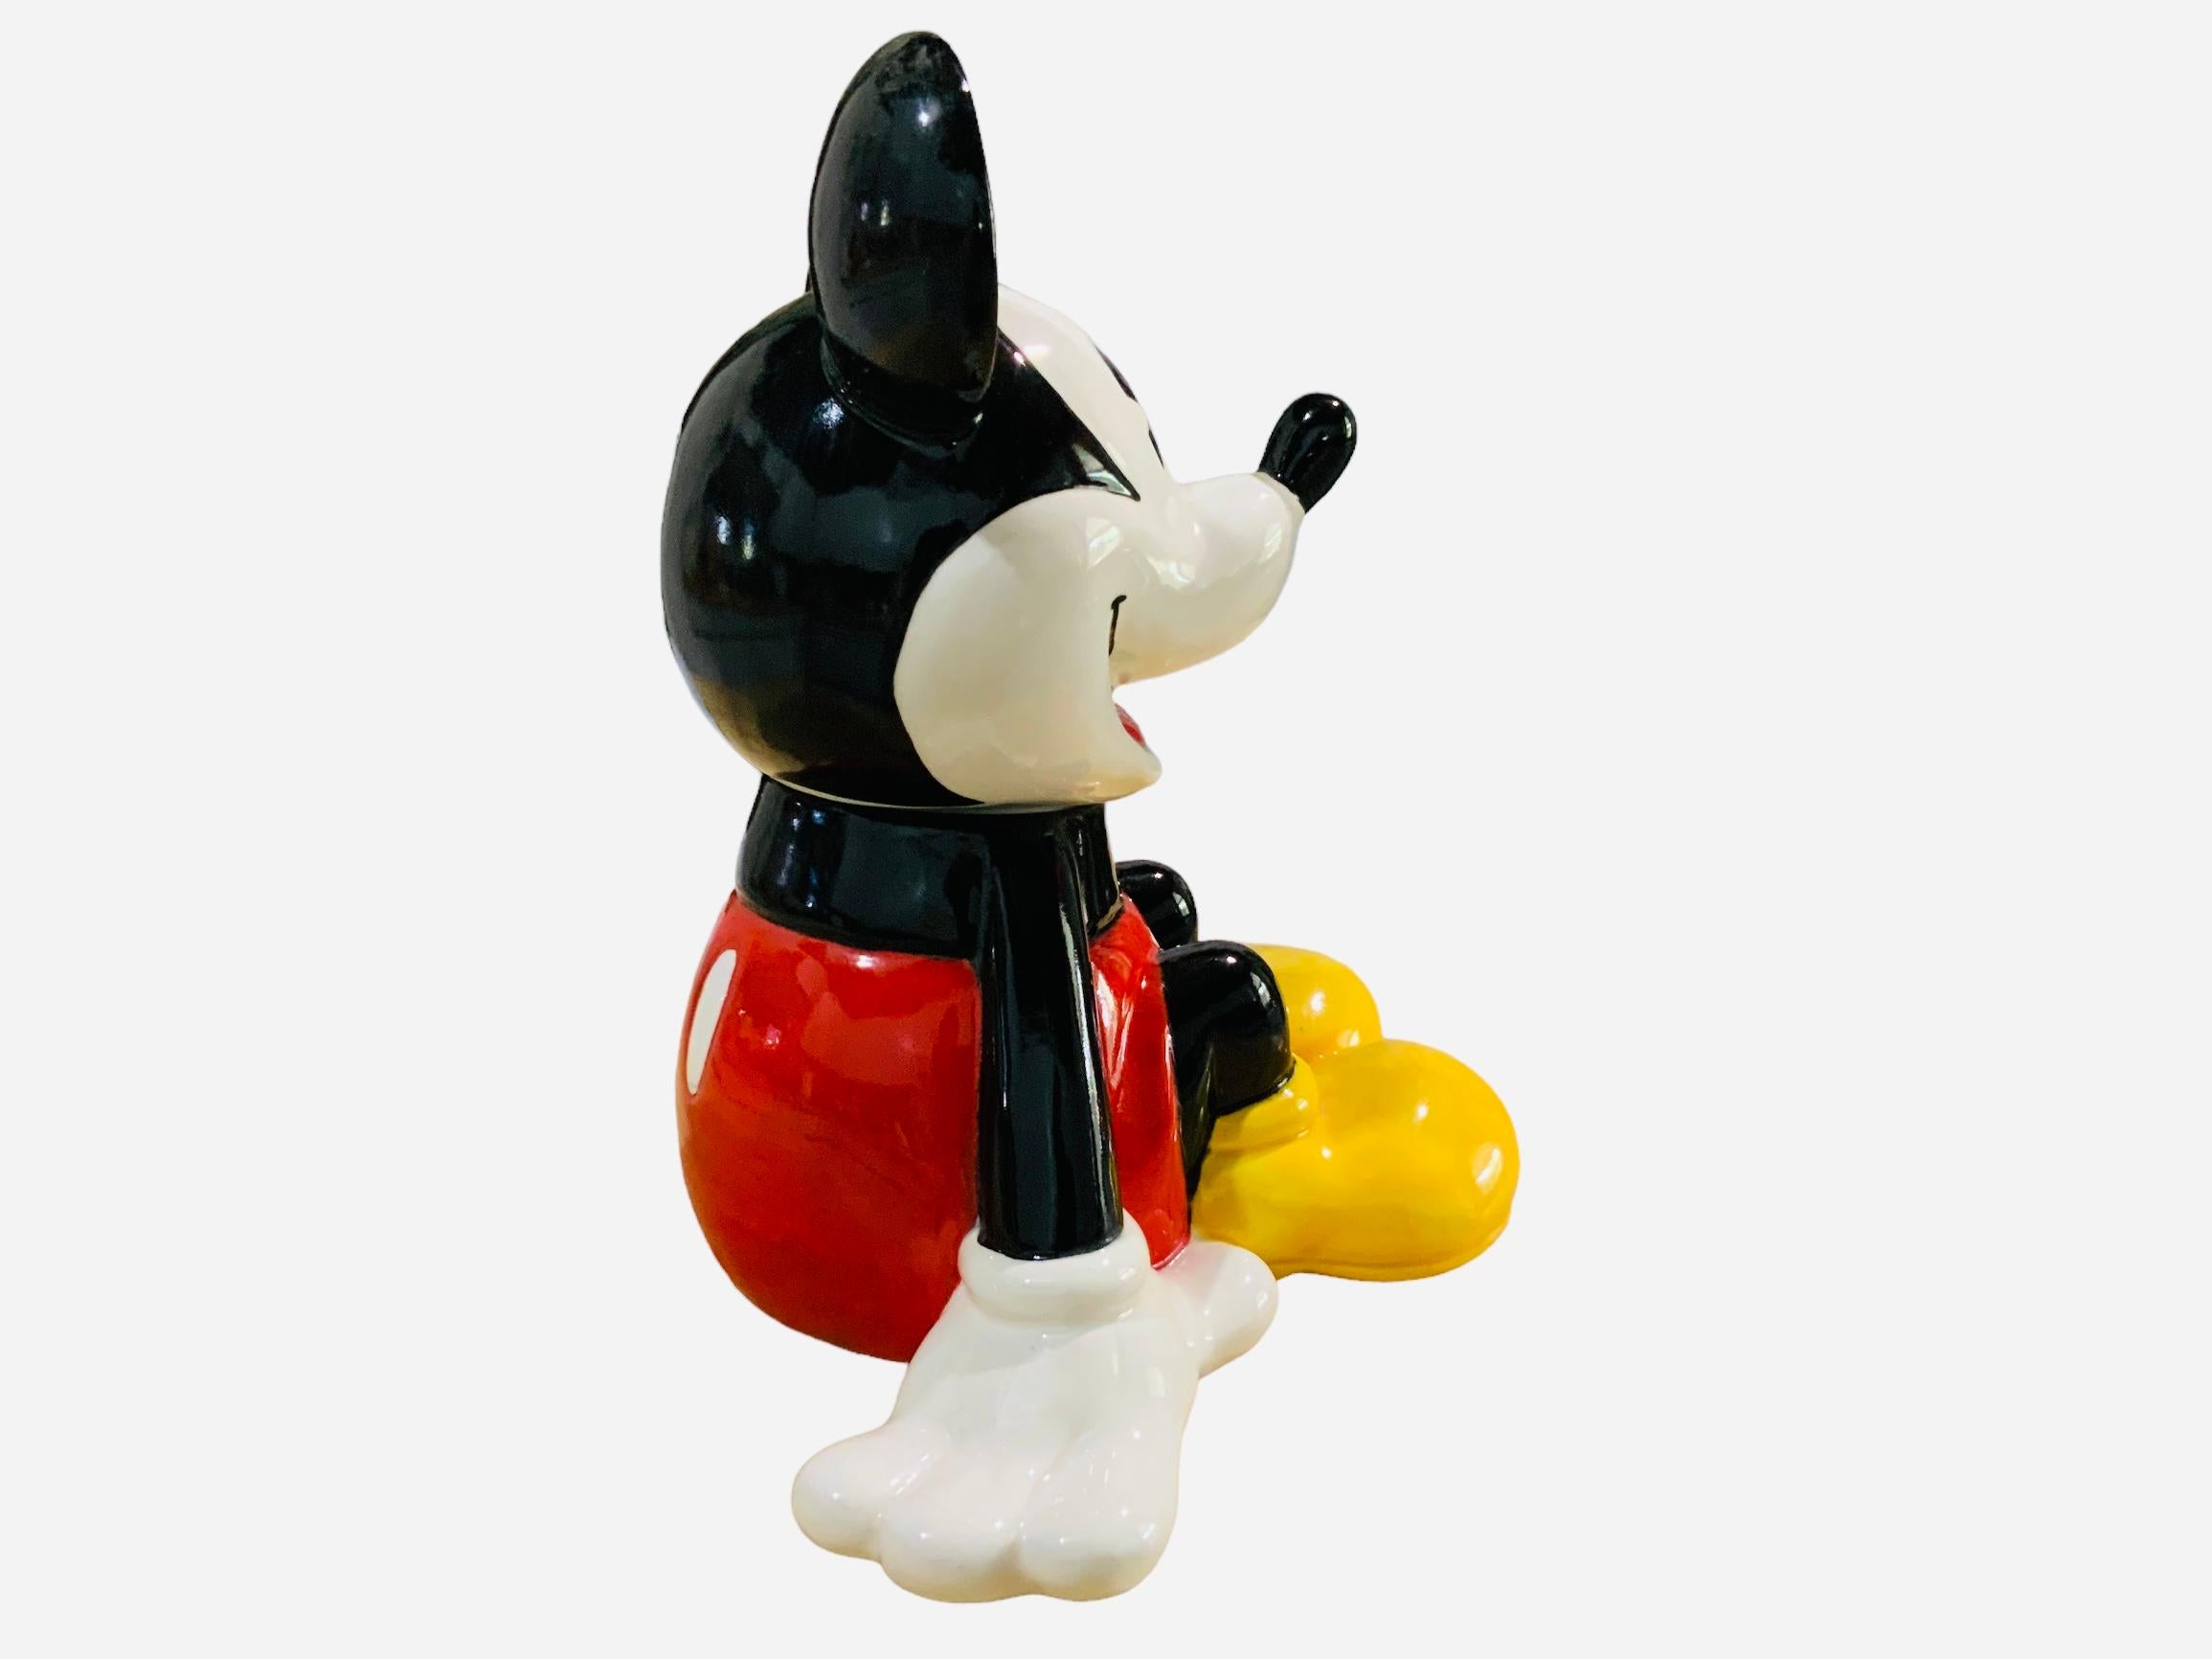 This is a Walt Disney, Mickey Mouse Cookie Jar. It depicts a hand painted glazed ceramic cookie jar shaped as a seated smiling Mickey Mouse. Below the base is hallmarked Mexico.